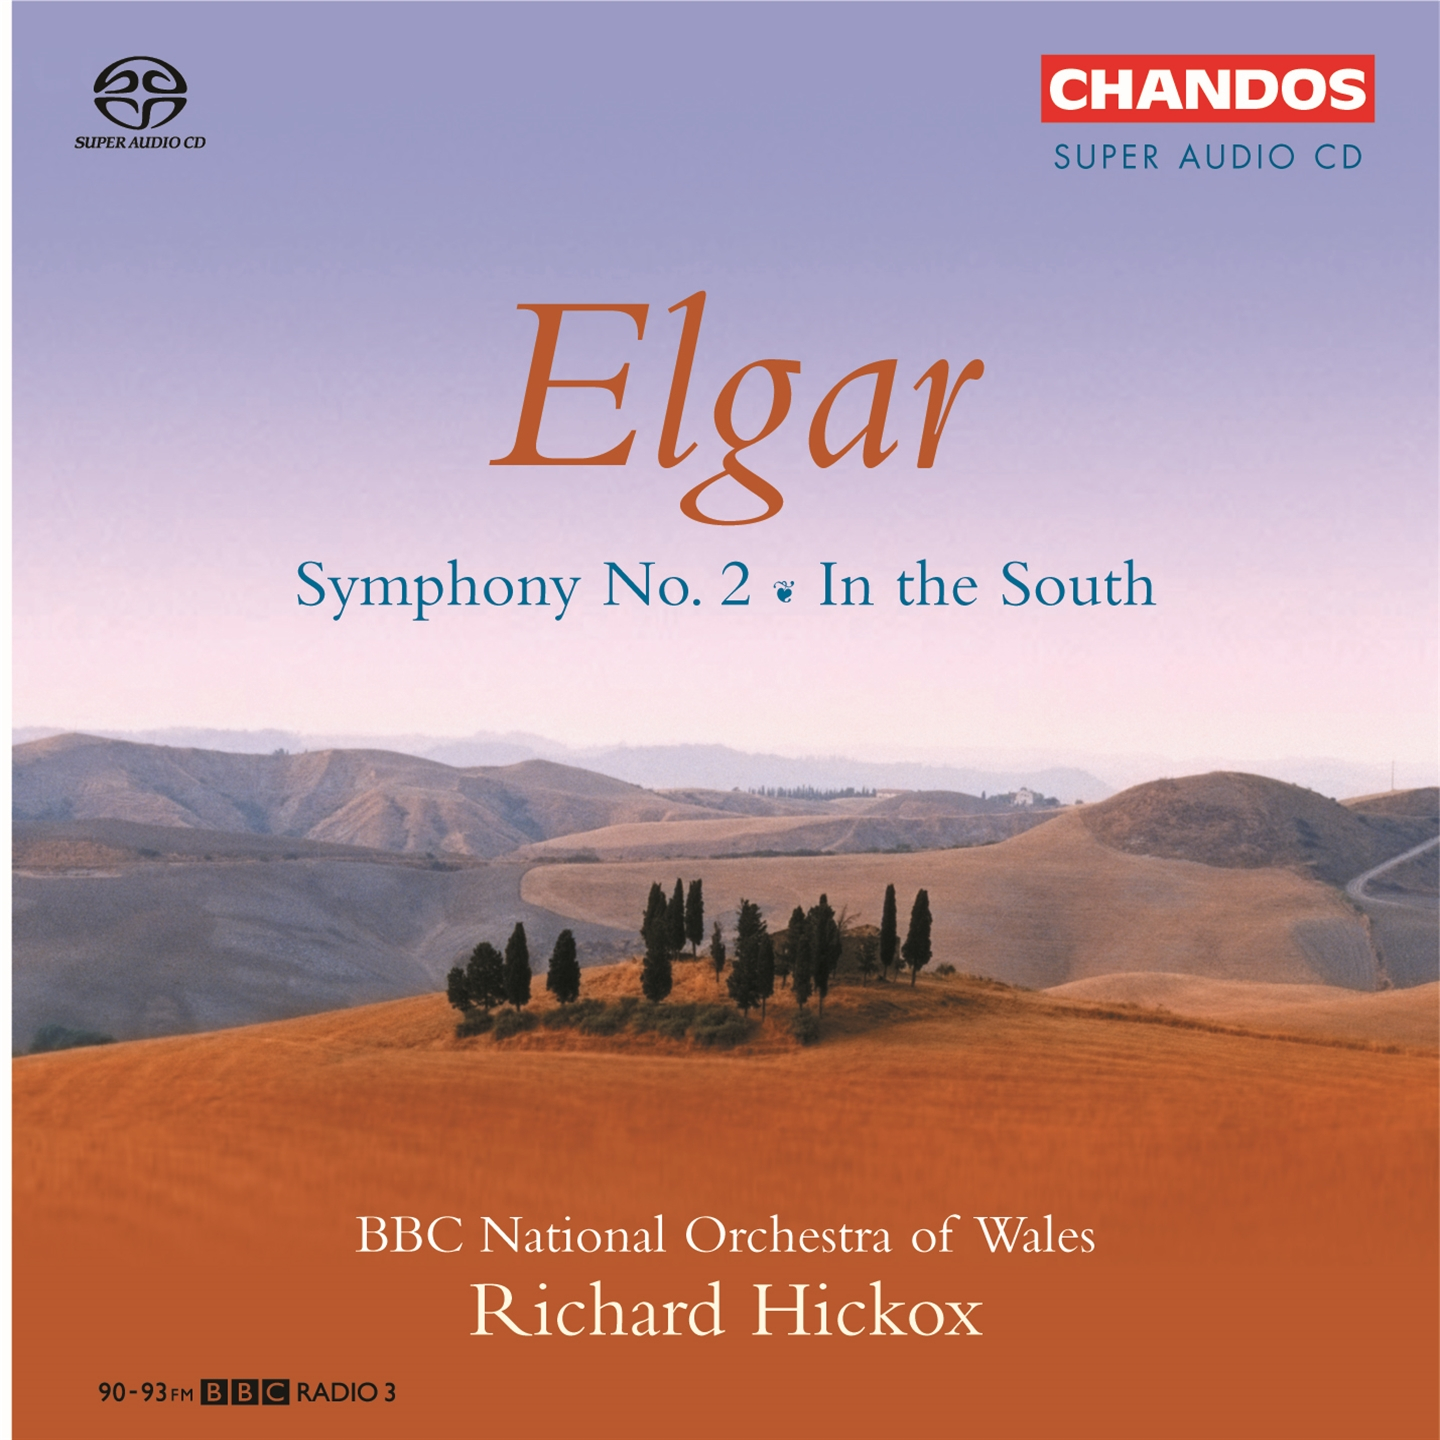 ELGAR: SYMPHONY NO 2 / IN THE SOUTH